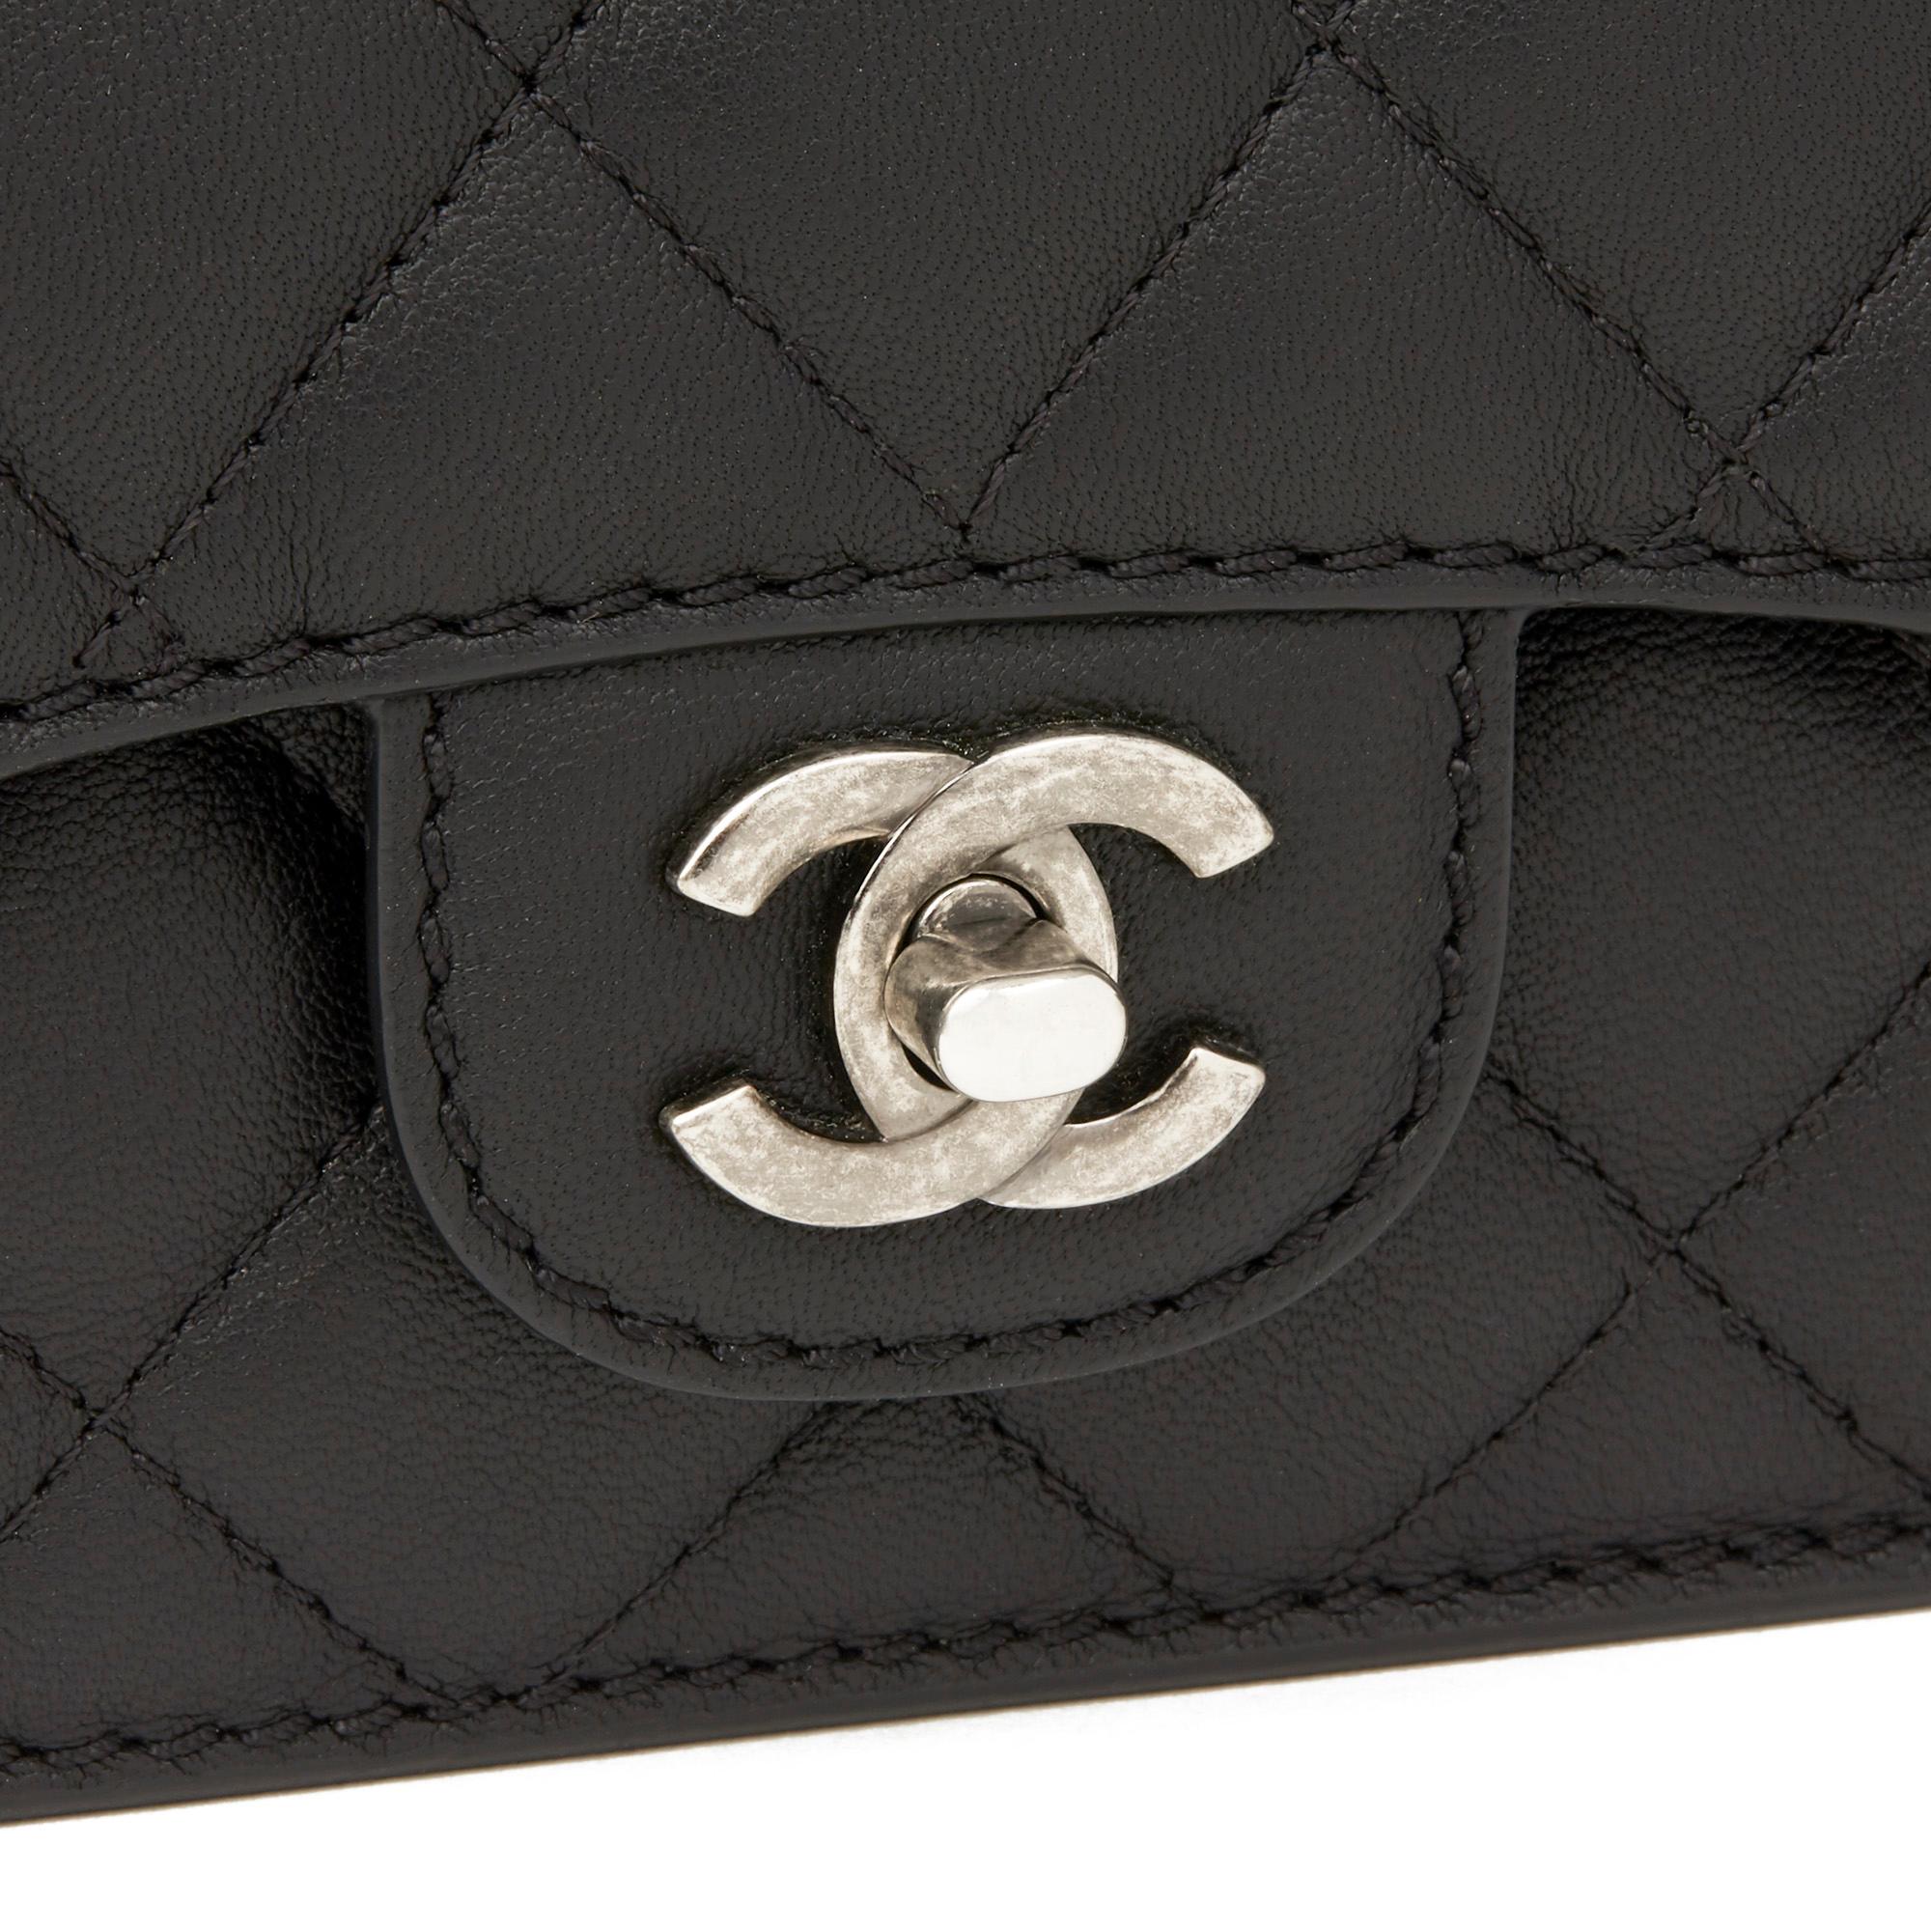 Women's 2017 Chanel Black Quilted Calfskin Leather Saddle Bag